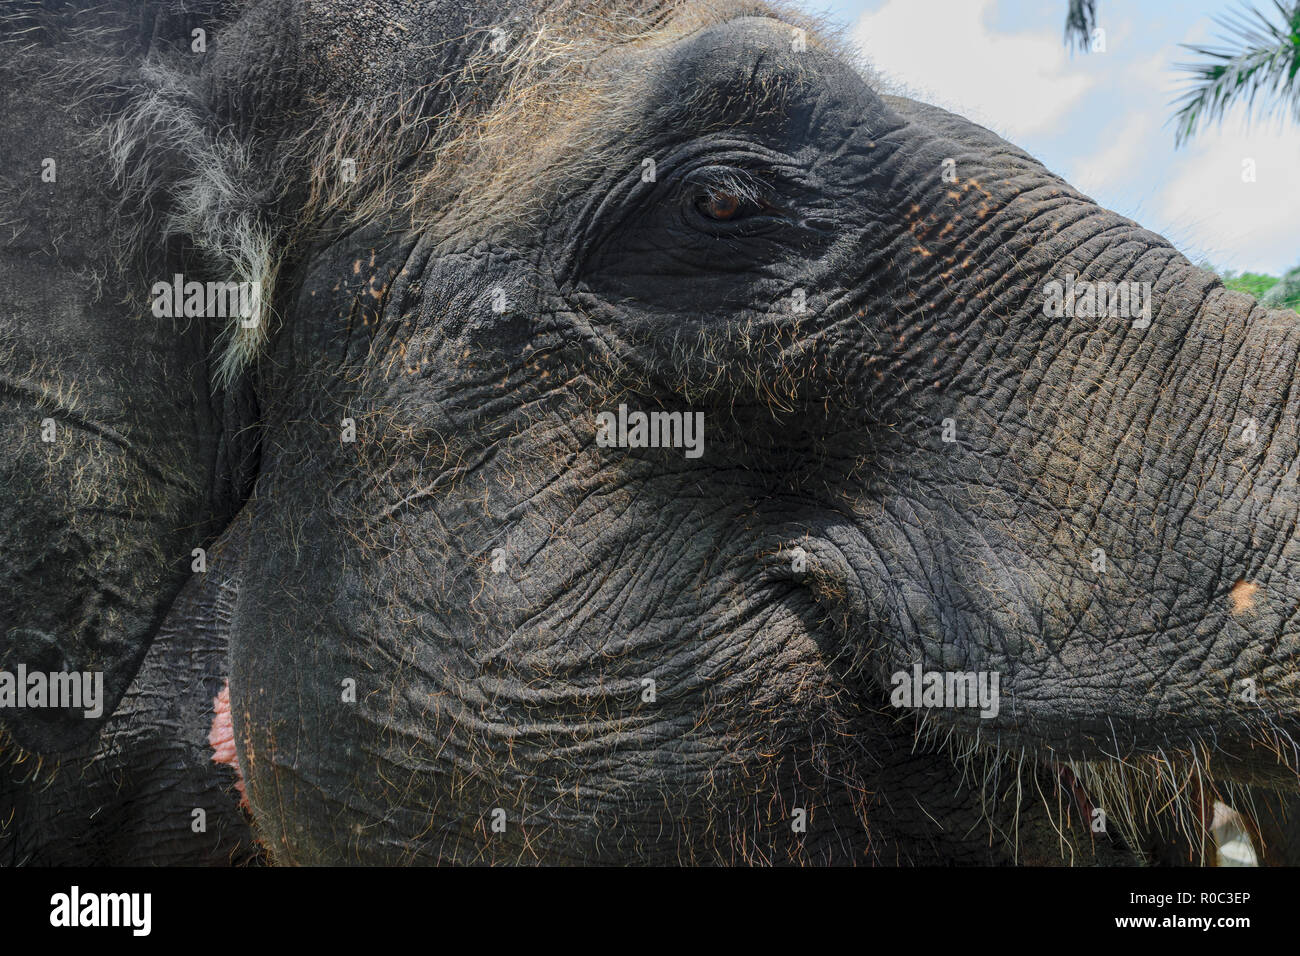 Profile view of huge Sumatra elephant trying to reach something with his trunk Stock Photo